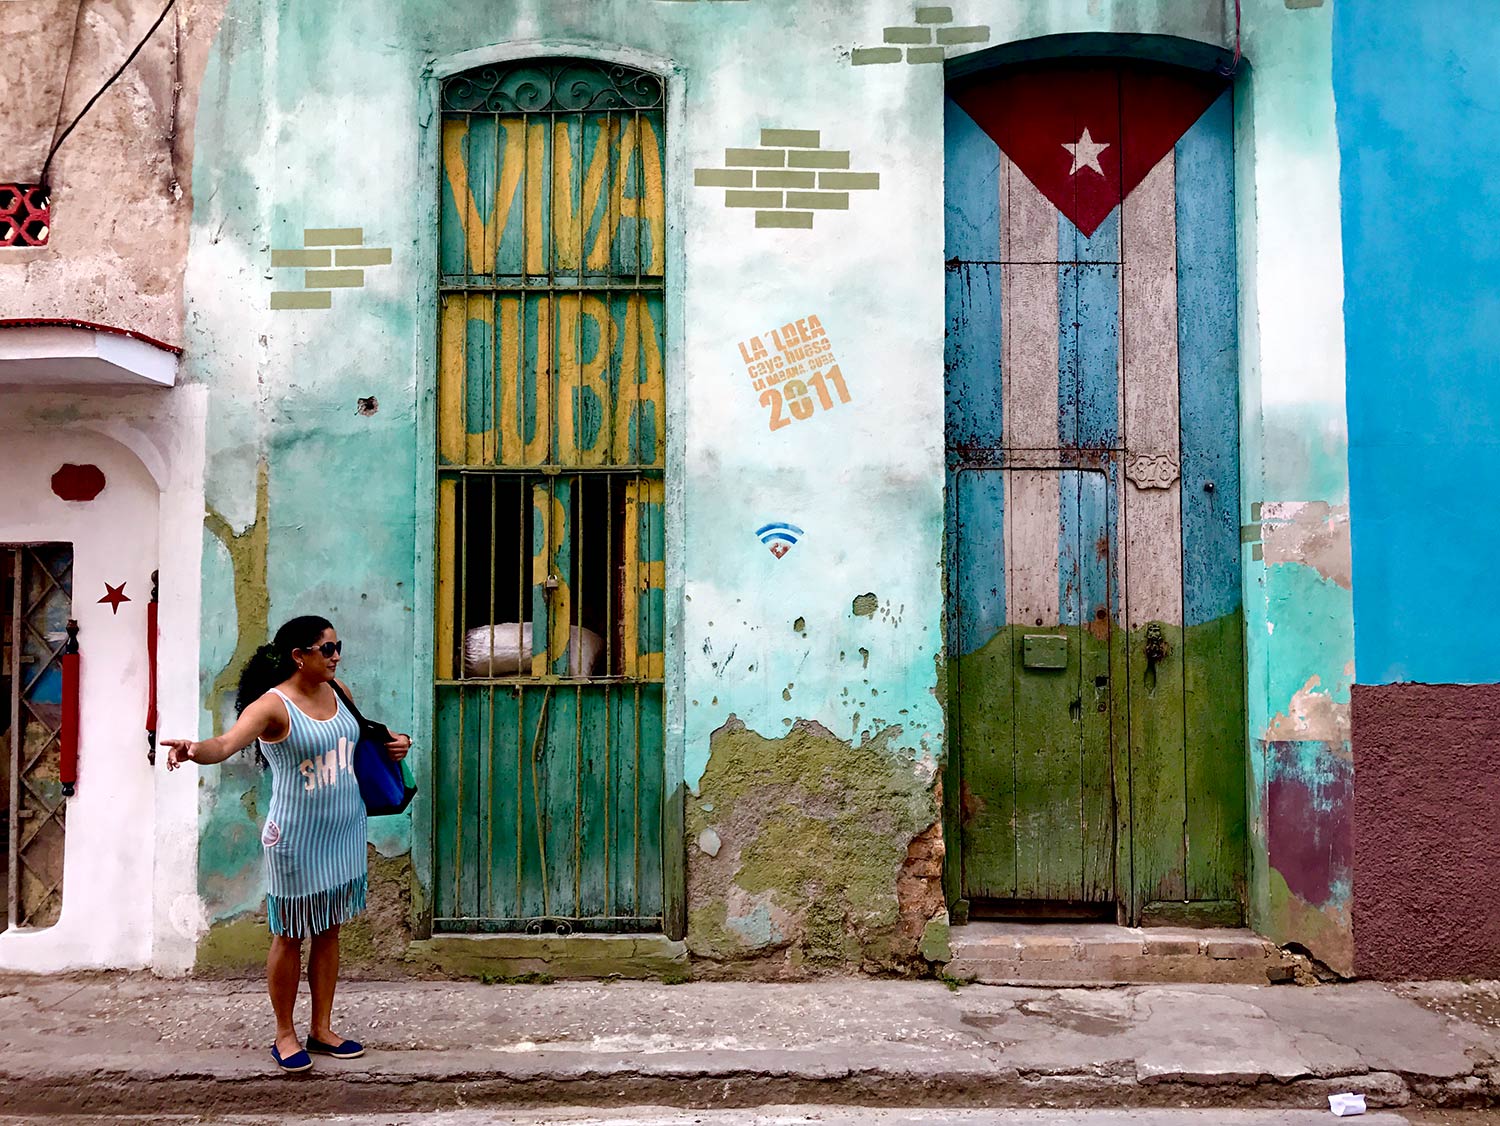 Urban Lens: In Old Havana, Cuba, a Young Boy and His Football